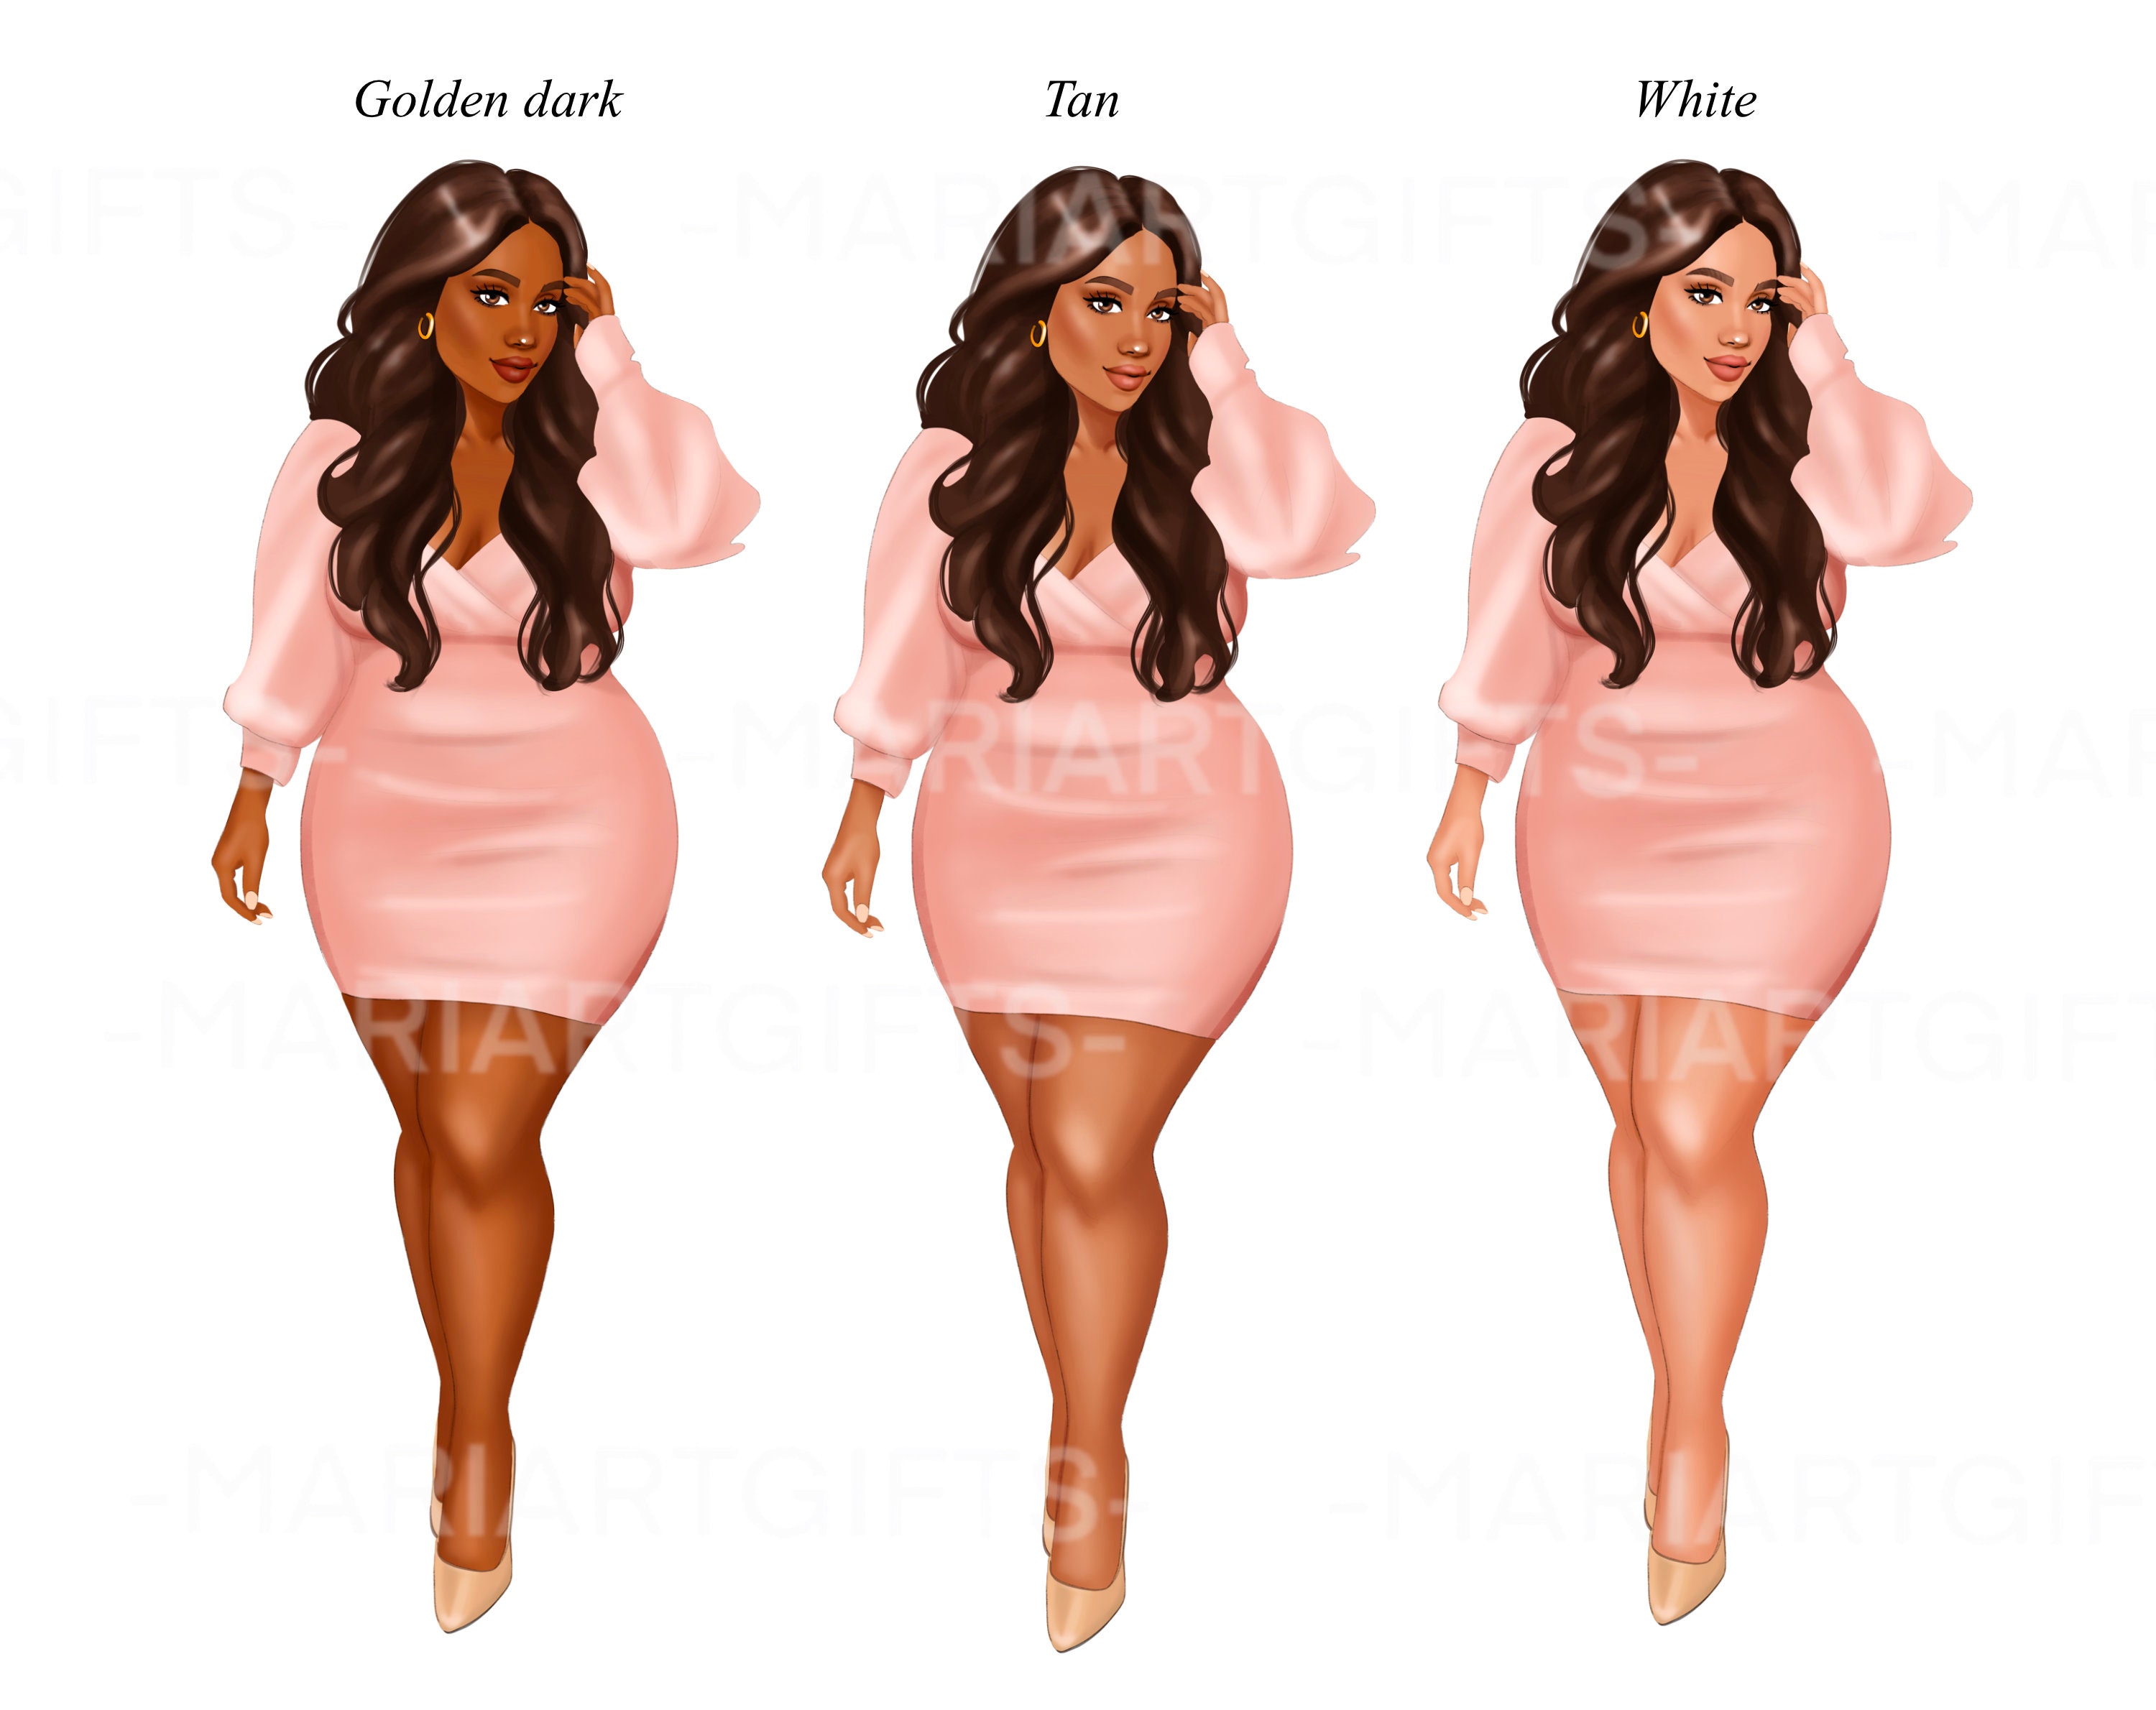 Curvy Girls Clipart Curvy Woman Clipart Casual Clipart Etsy